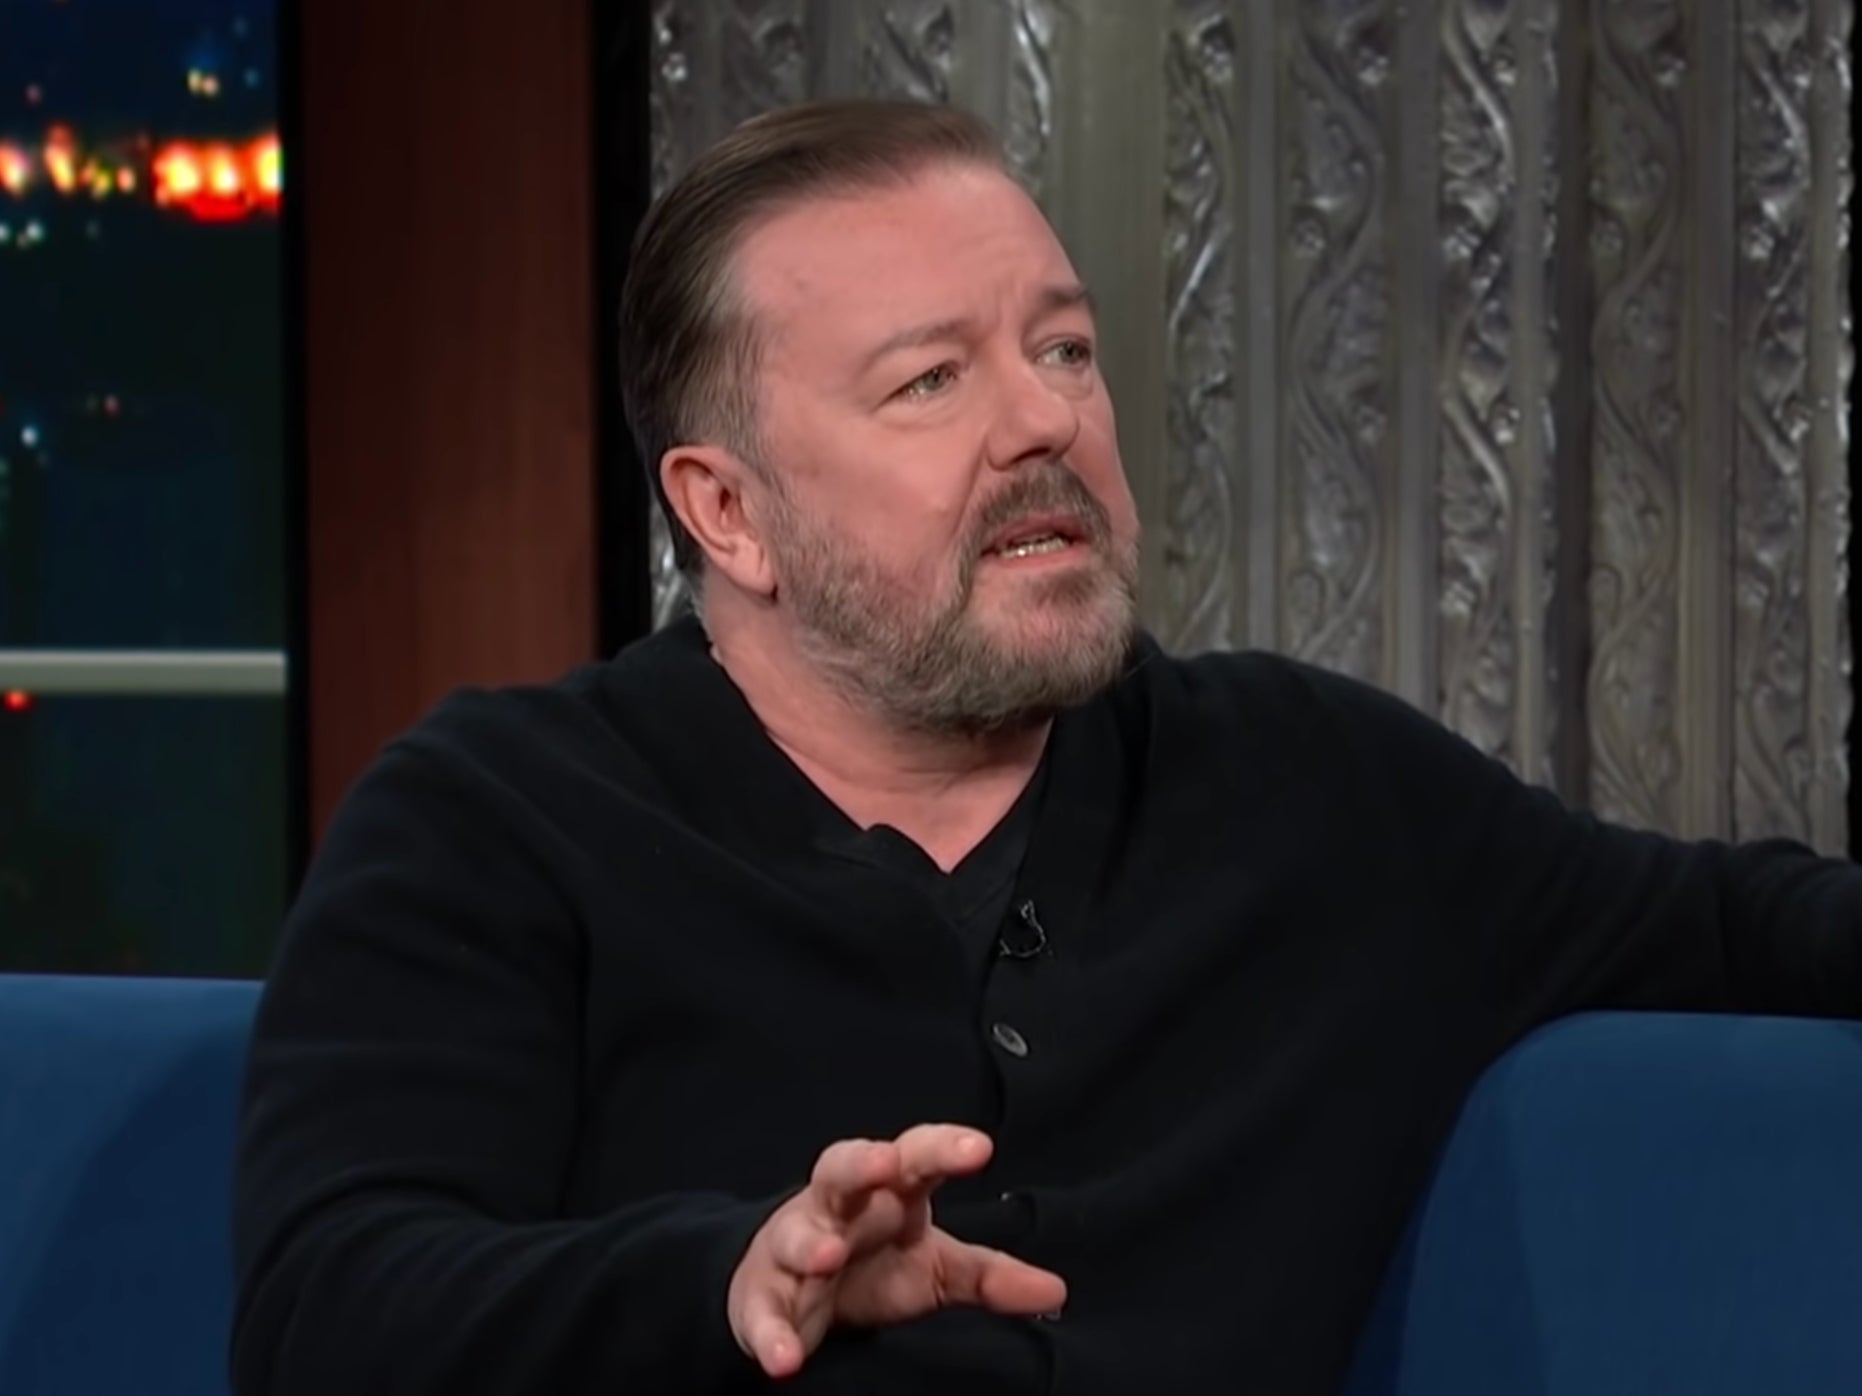 Ricky Gervais on ‘The Late Show with Stephen Colbert’